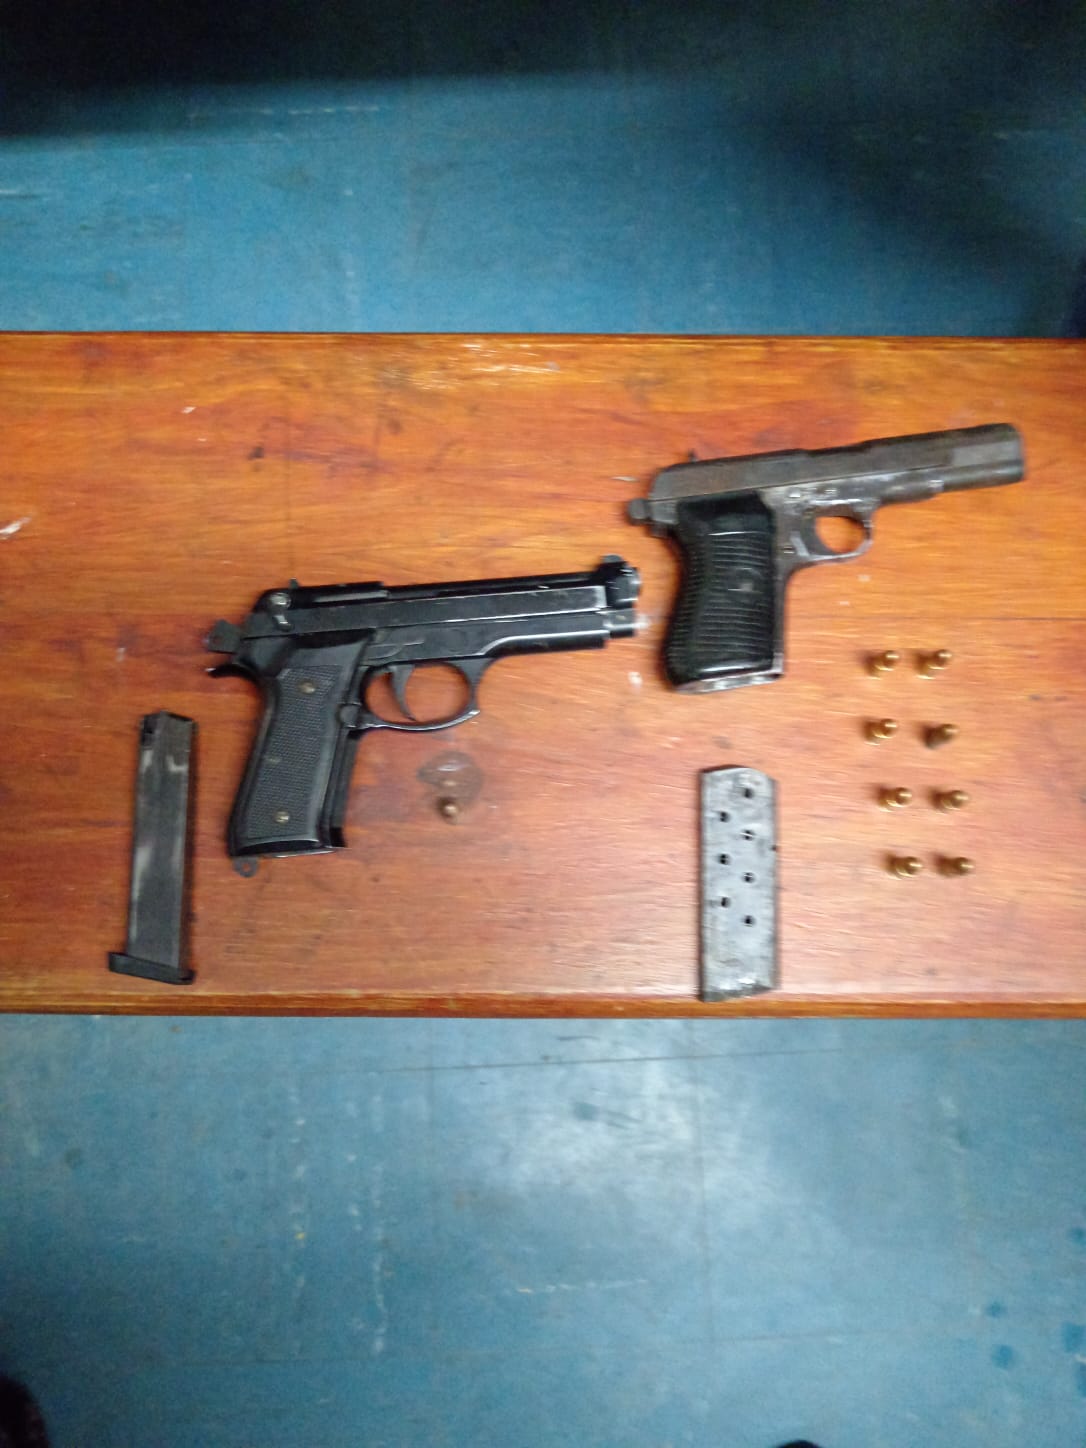 Suspects who discard firearms apprehended